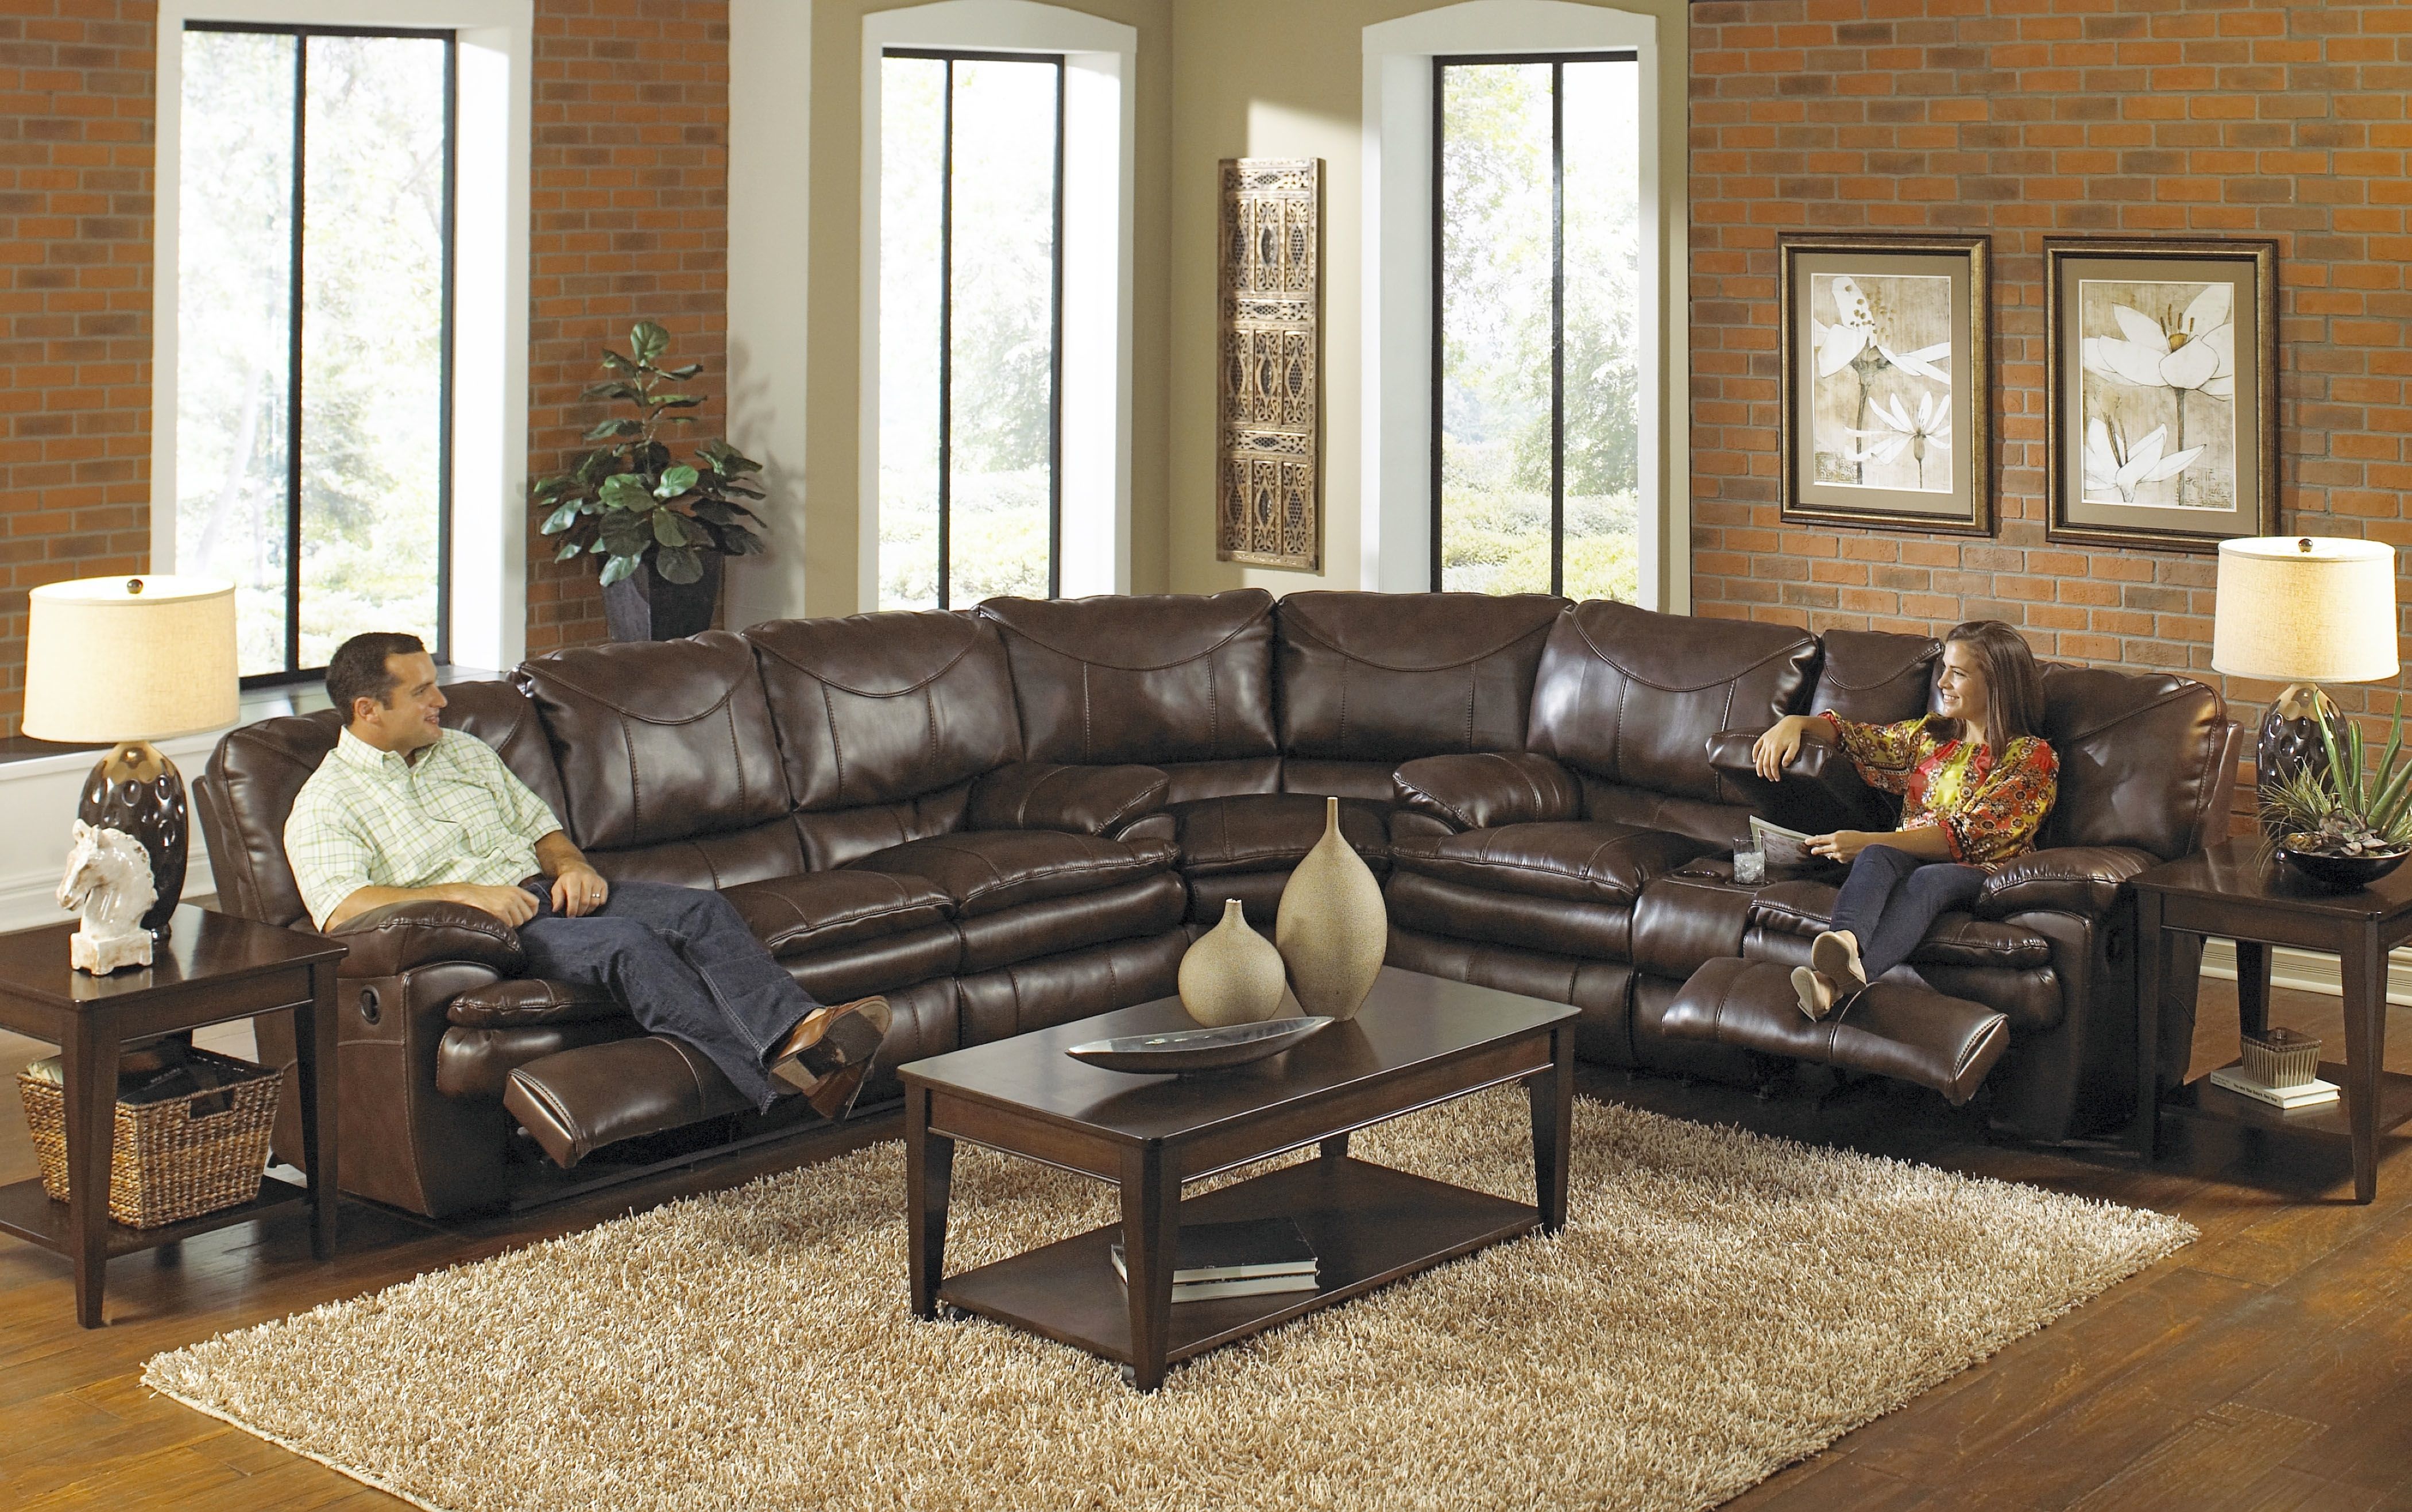 Epic High Quality Sectional Sofa 21 With Additional Modern Sofa With Regard To High Quality Sectional Sofas (View 6 of 10)